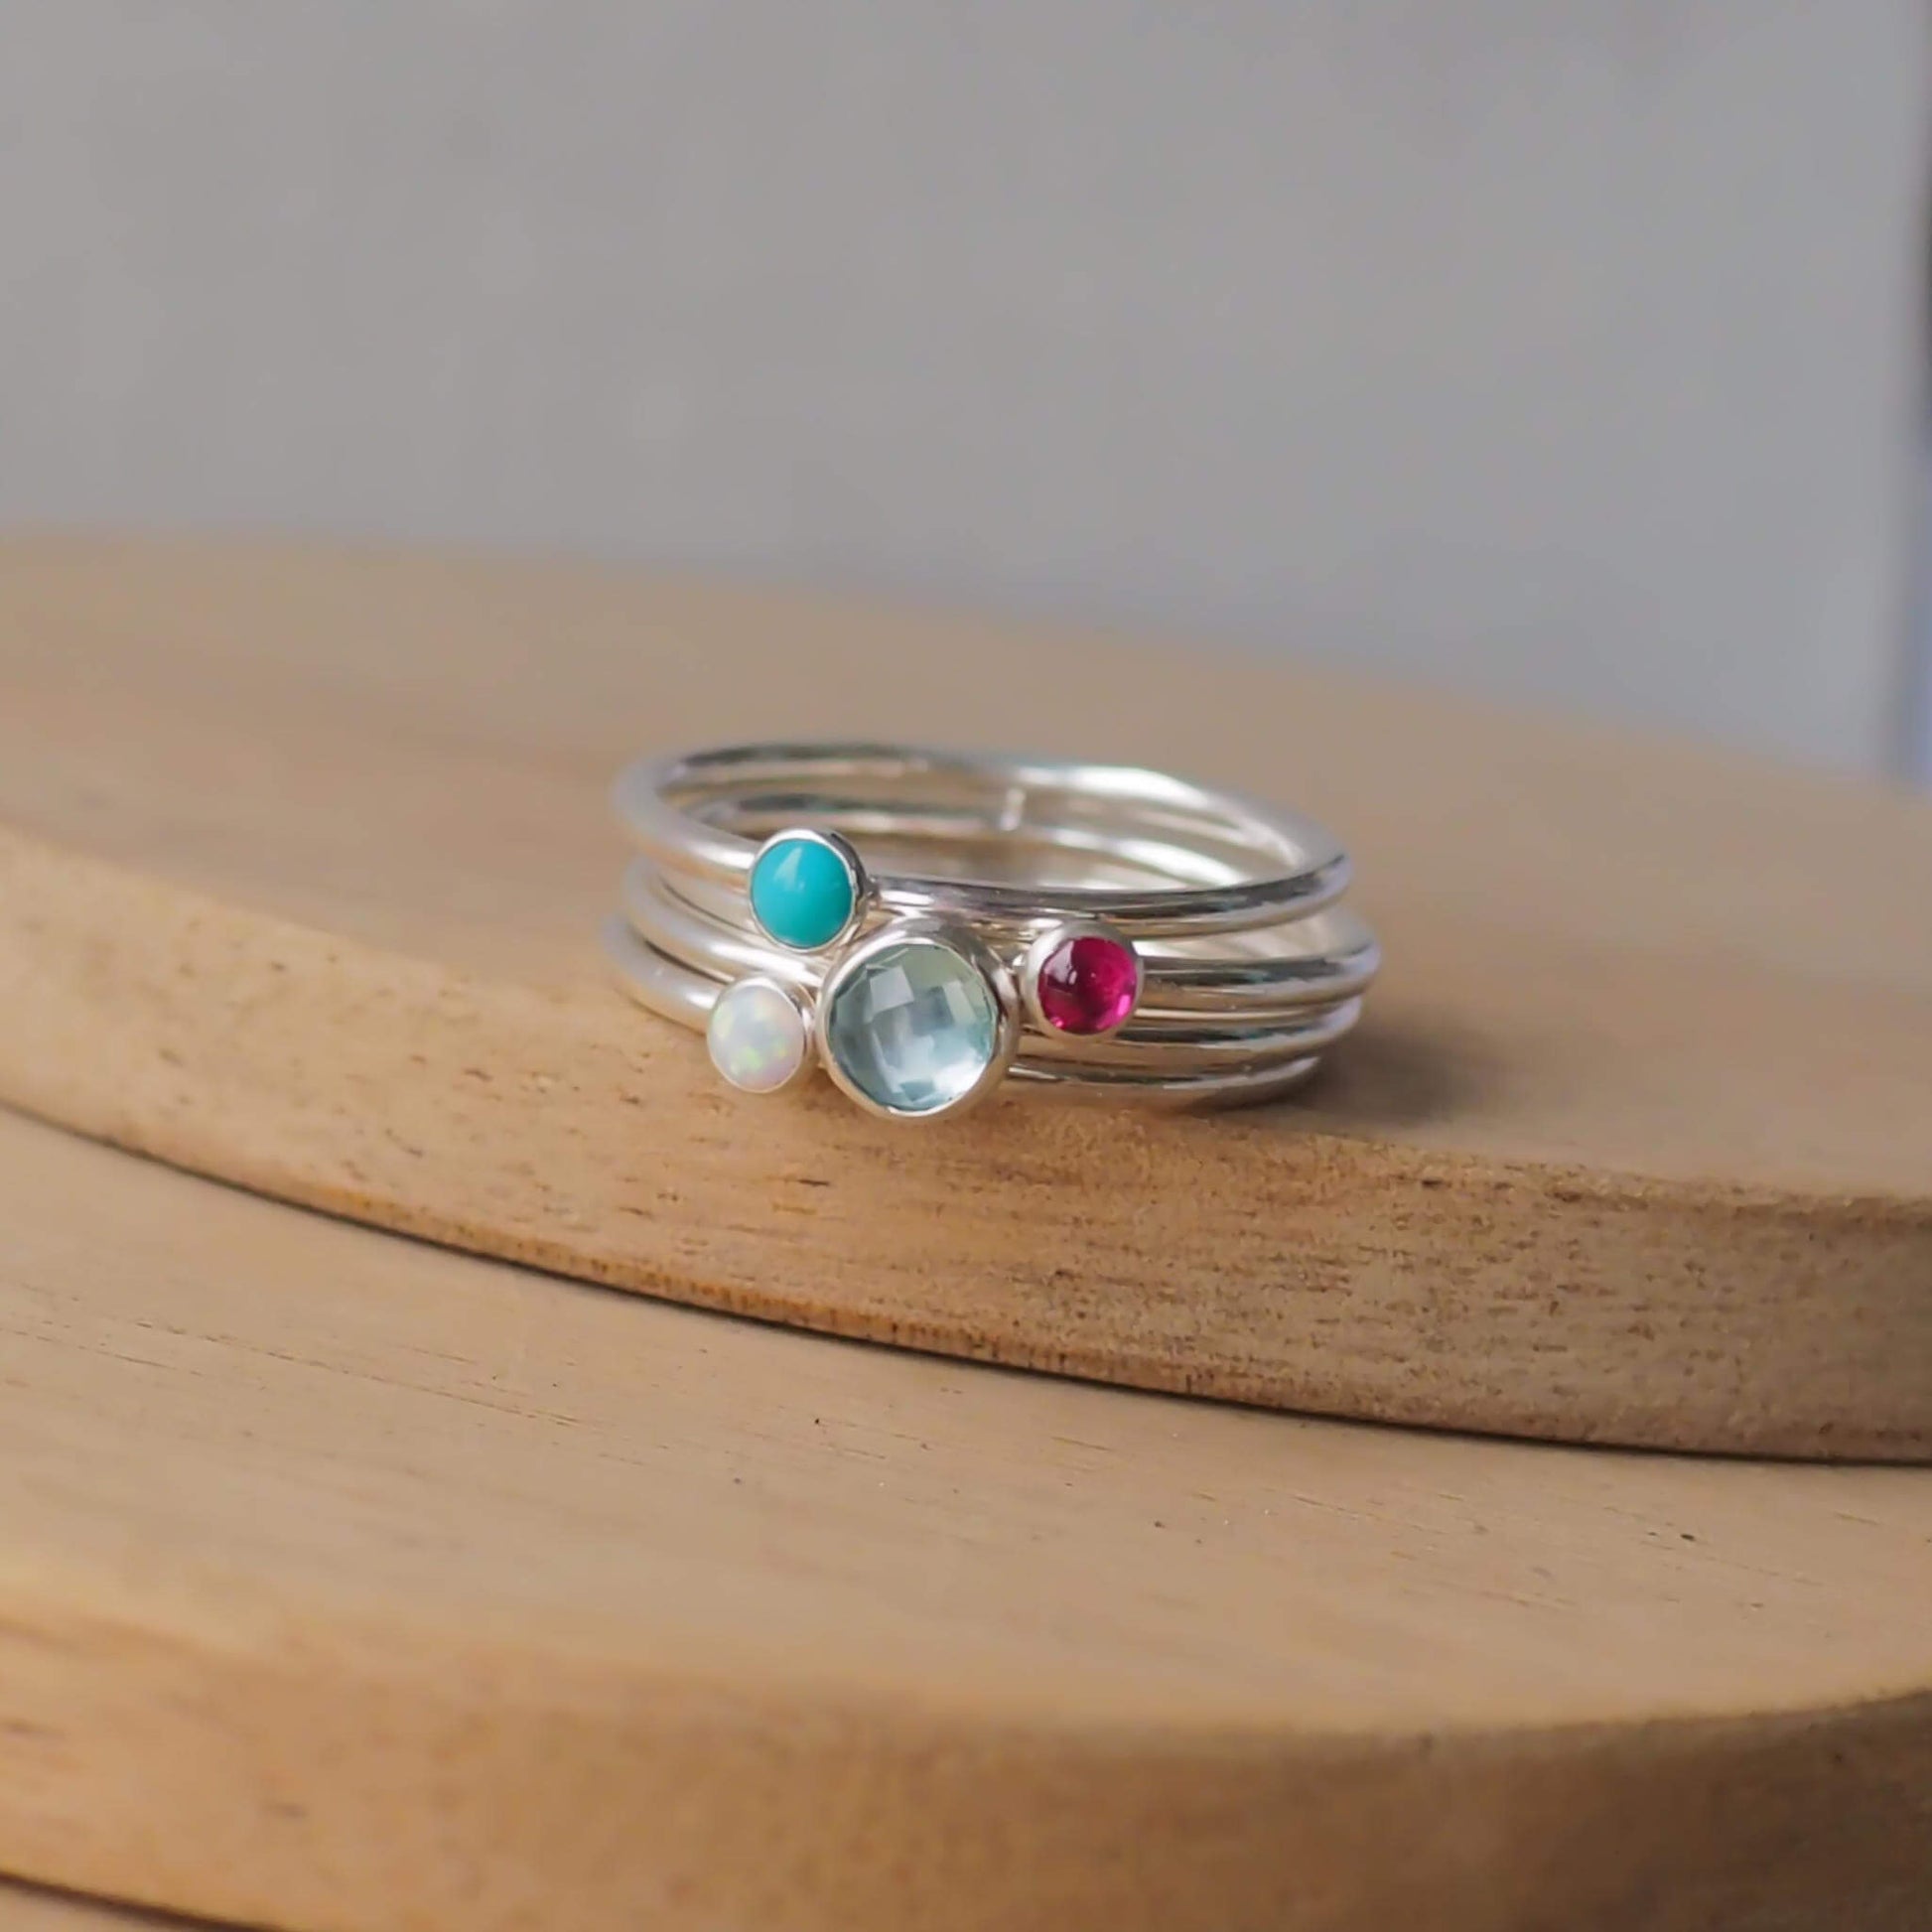 Four Ring Set with Blue Topaz, Lab Ruby, Turquoise and Lab Opal to mark March, December and October Birthdays. The four rings are made with Sterling Silver and a 5mm blue round cabochon, with three further rings with 3mm round gems in a iridescent white lab opal, turquoise, and a pinky red lab ruby. Handmade in Scotland by maram jewellery